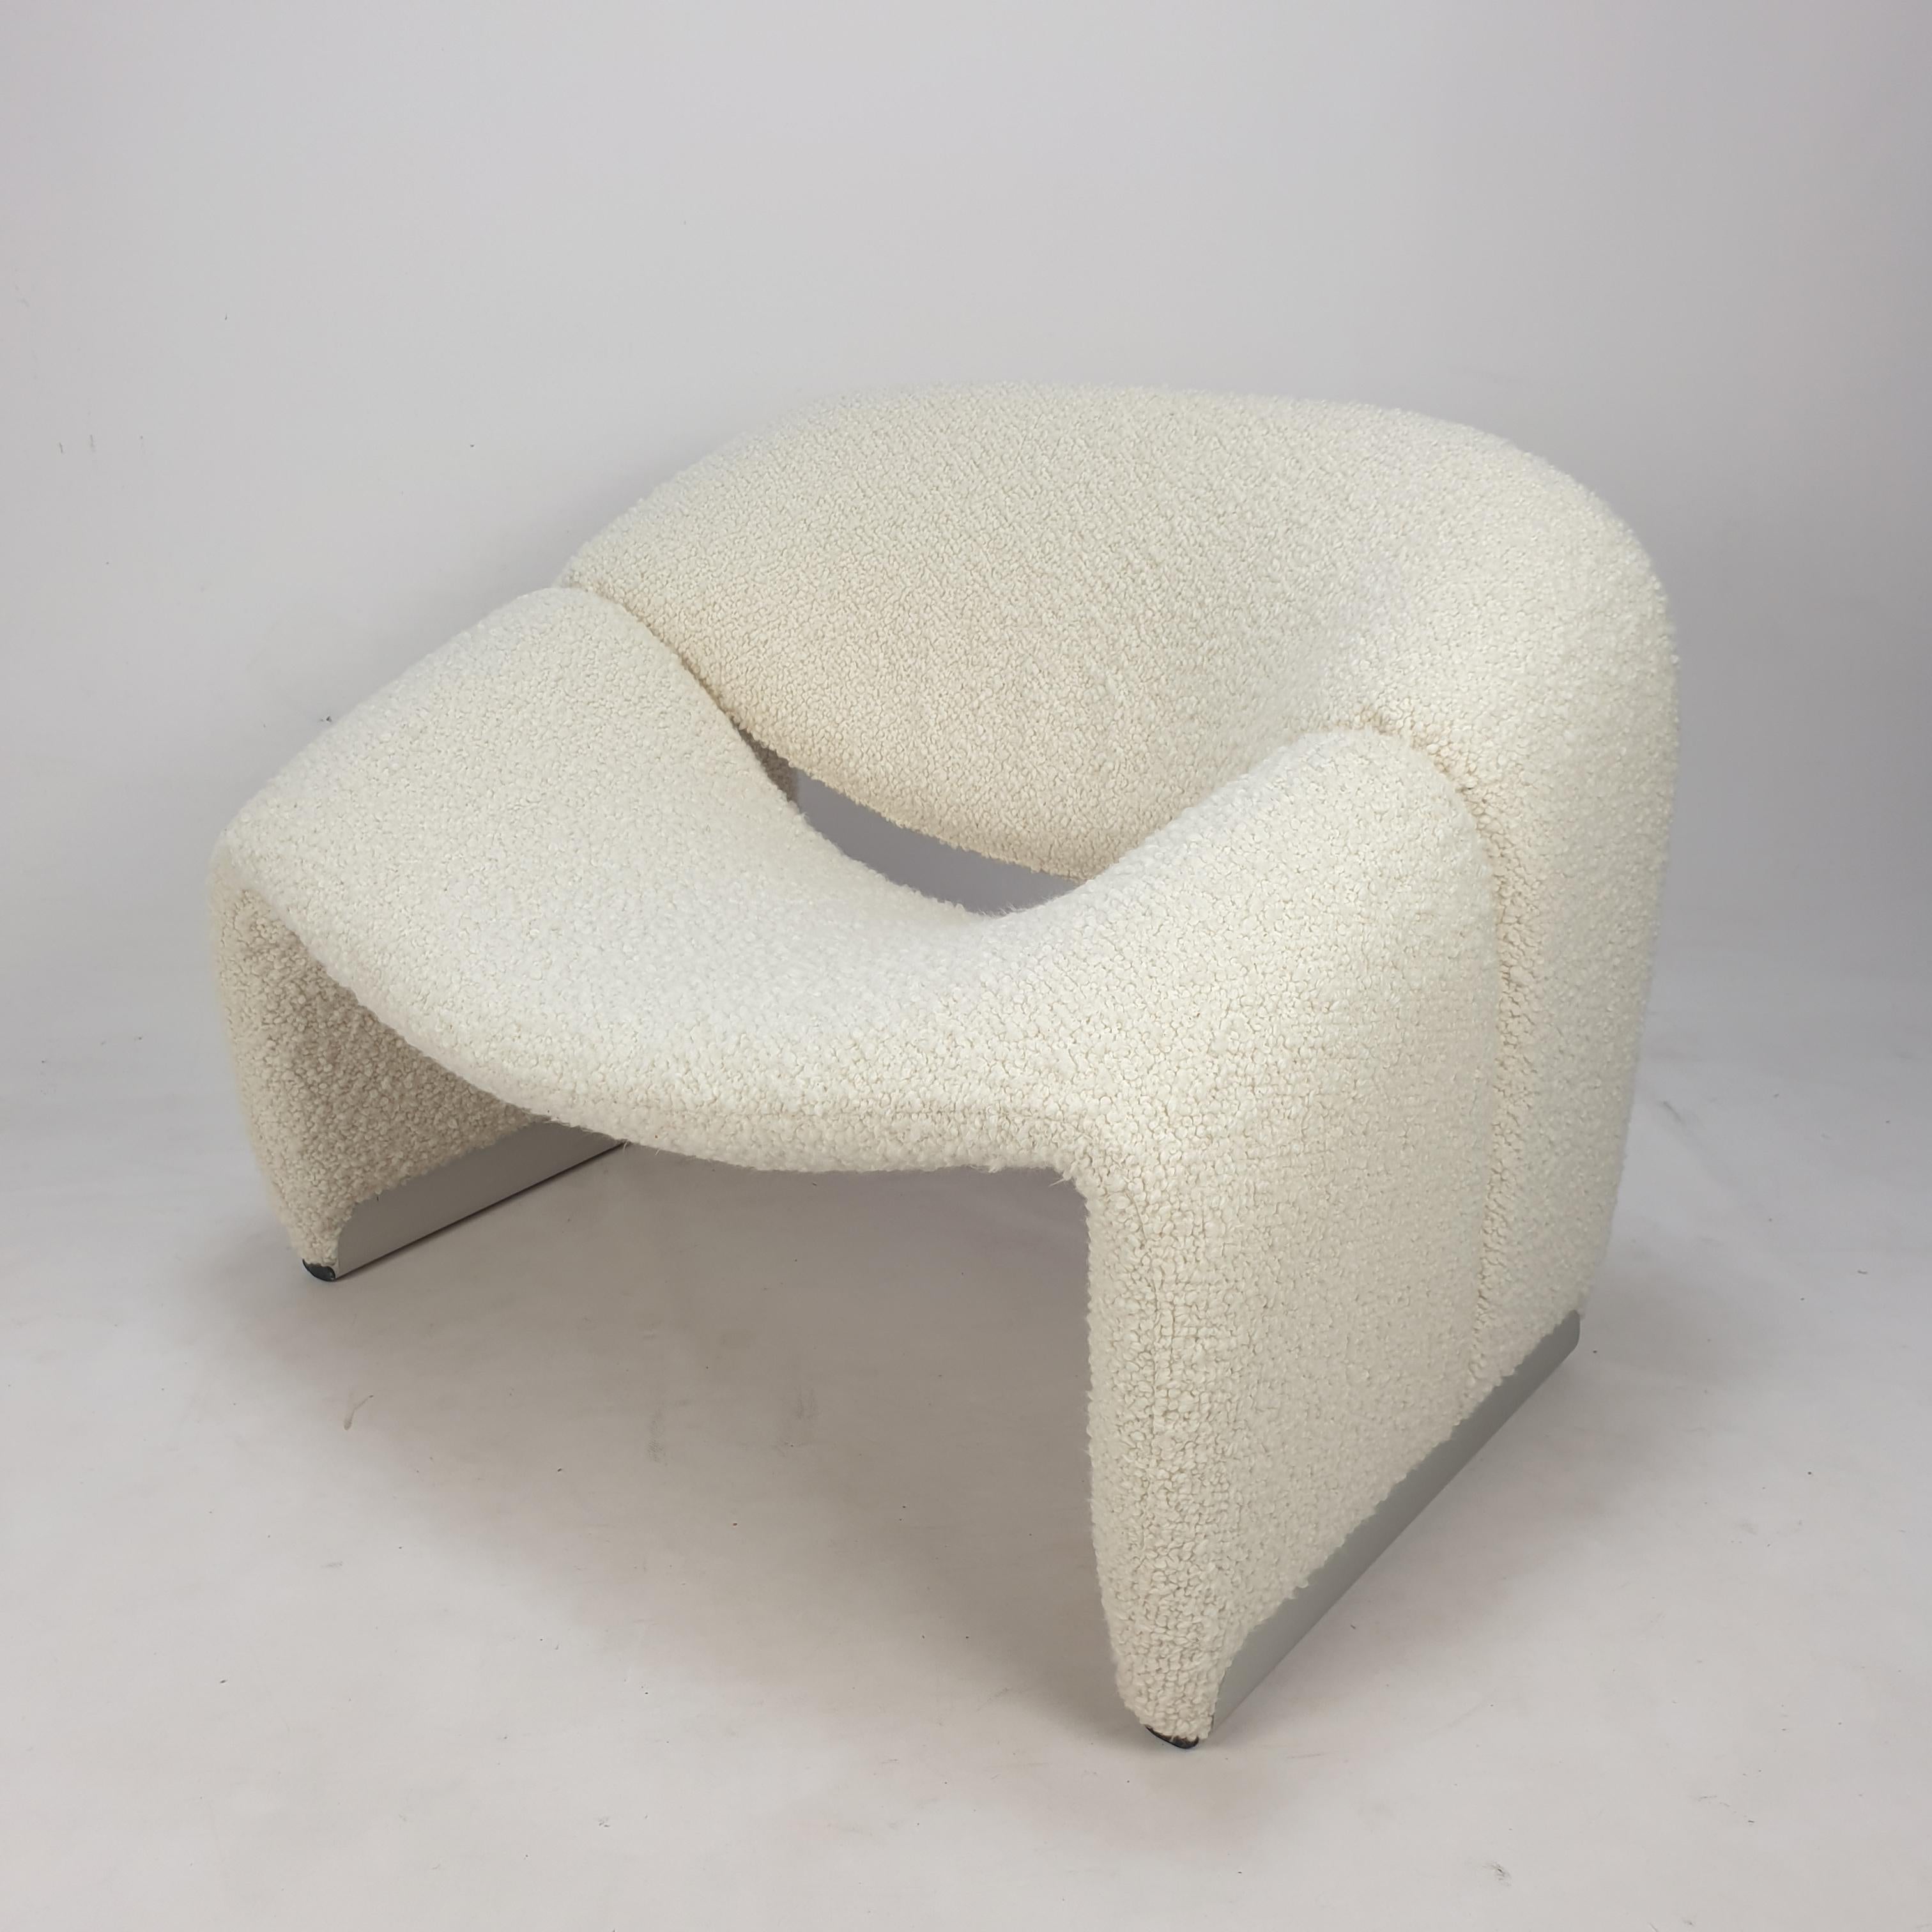 Lovely and very comfortable artifort groovy chair (or 